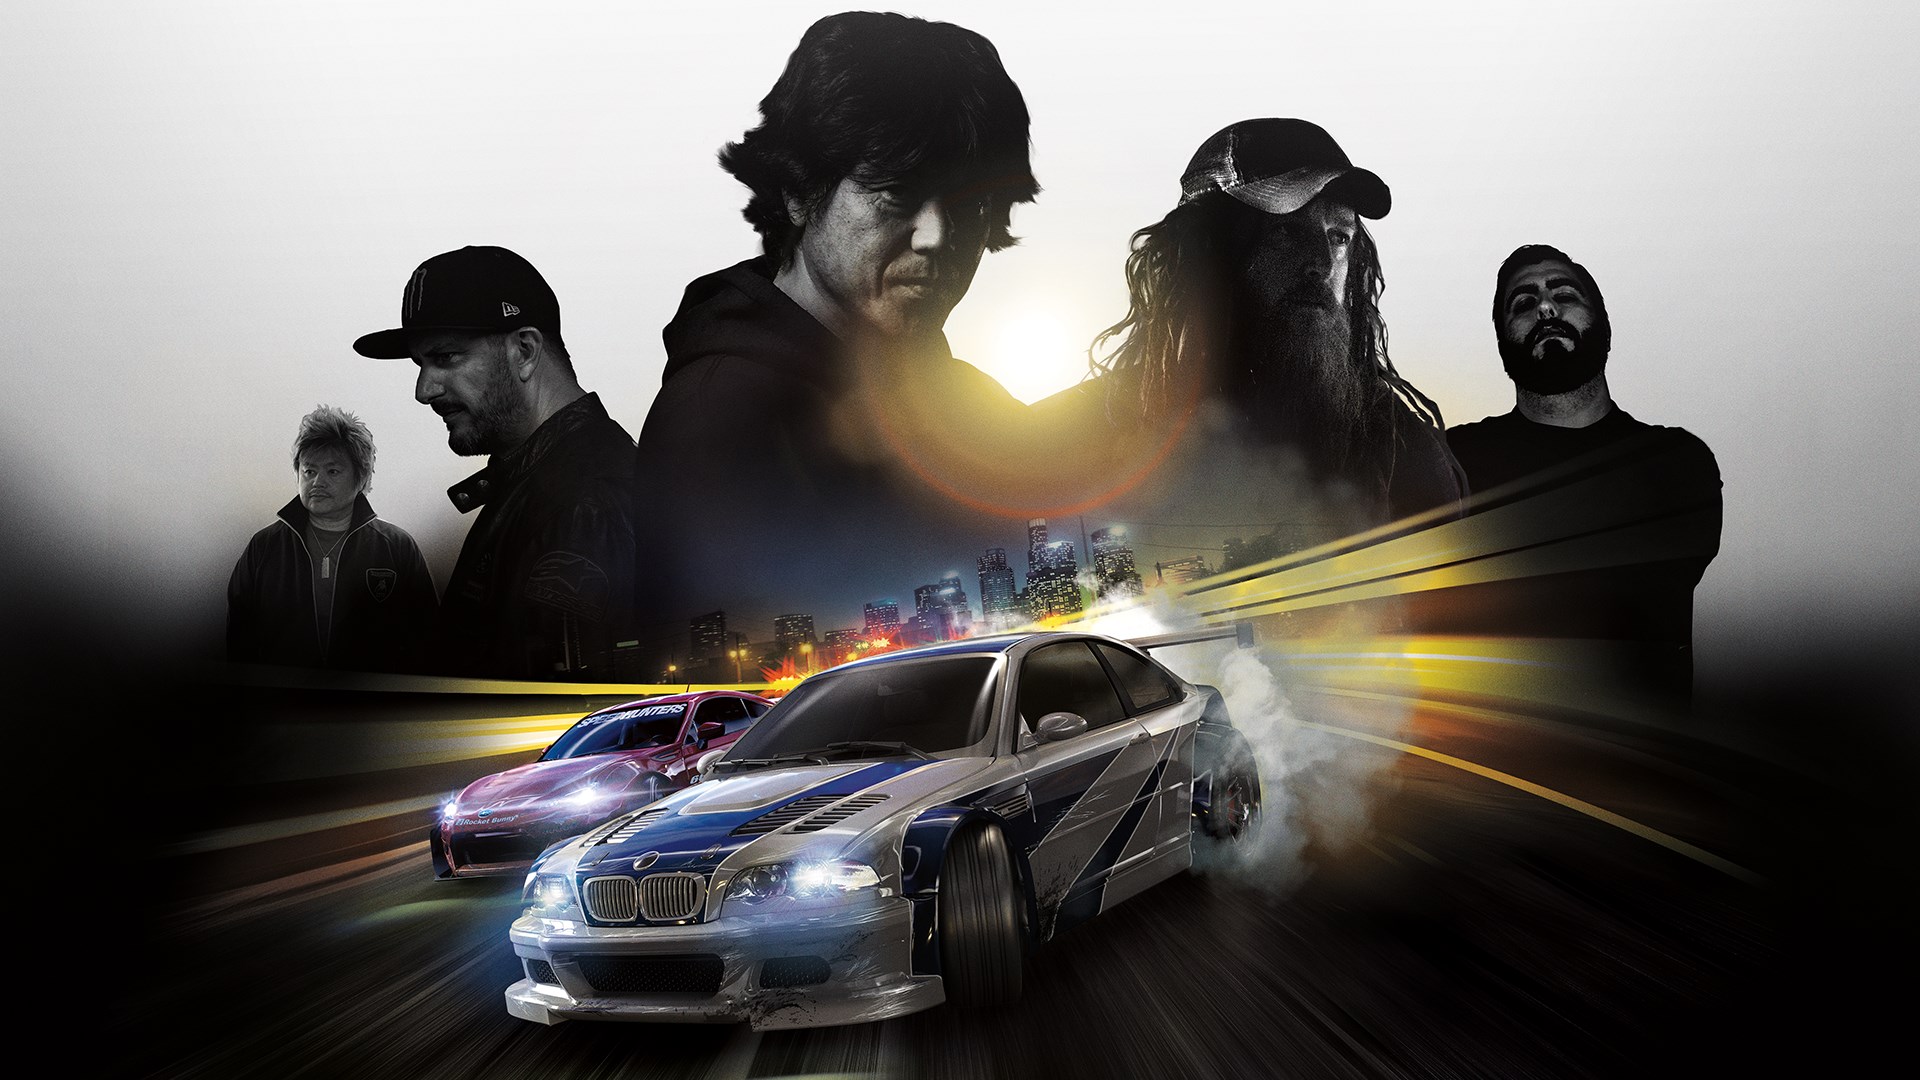 Need for Speed™ Rivals: Complete Edition